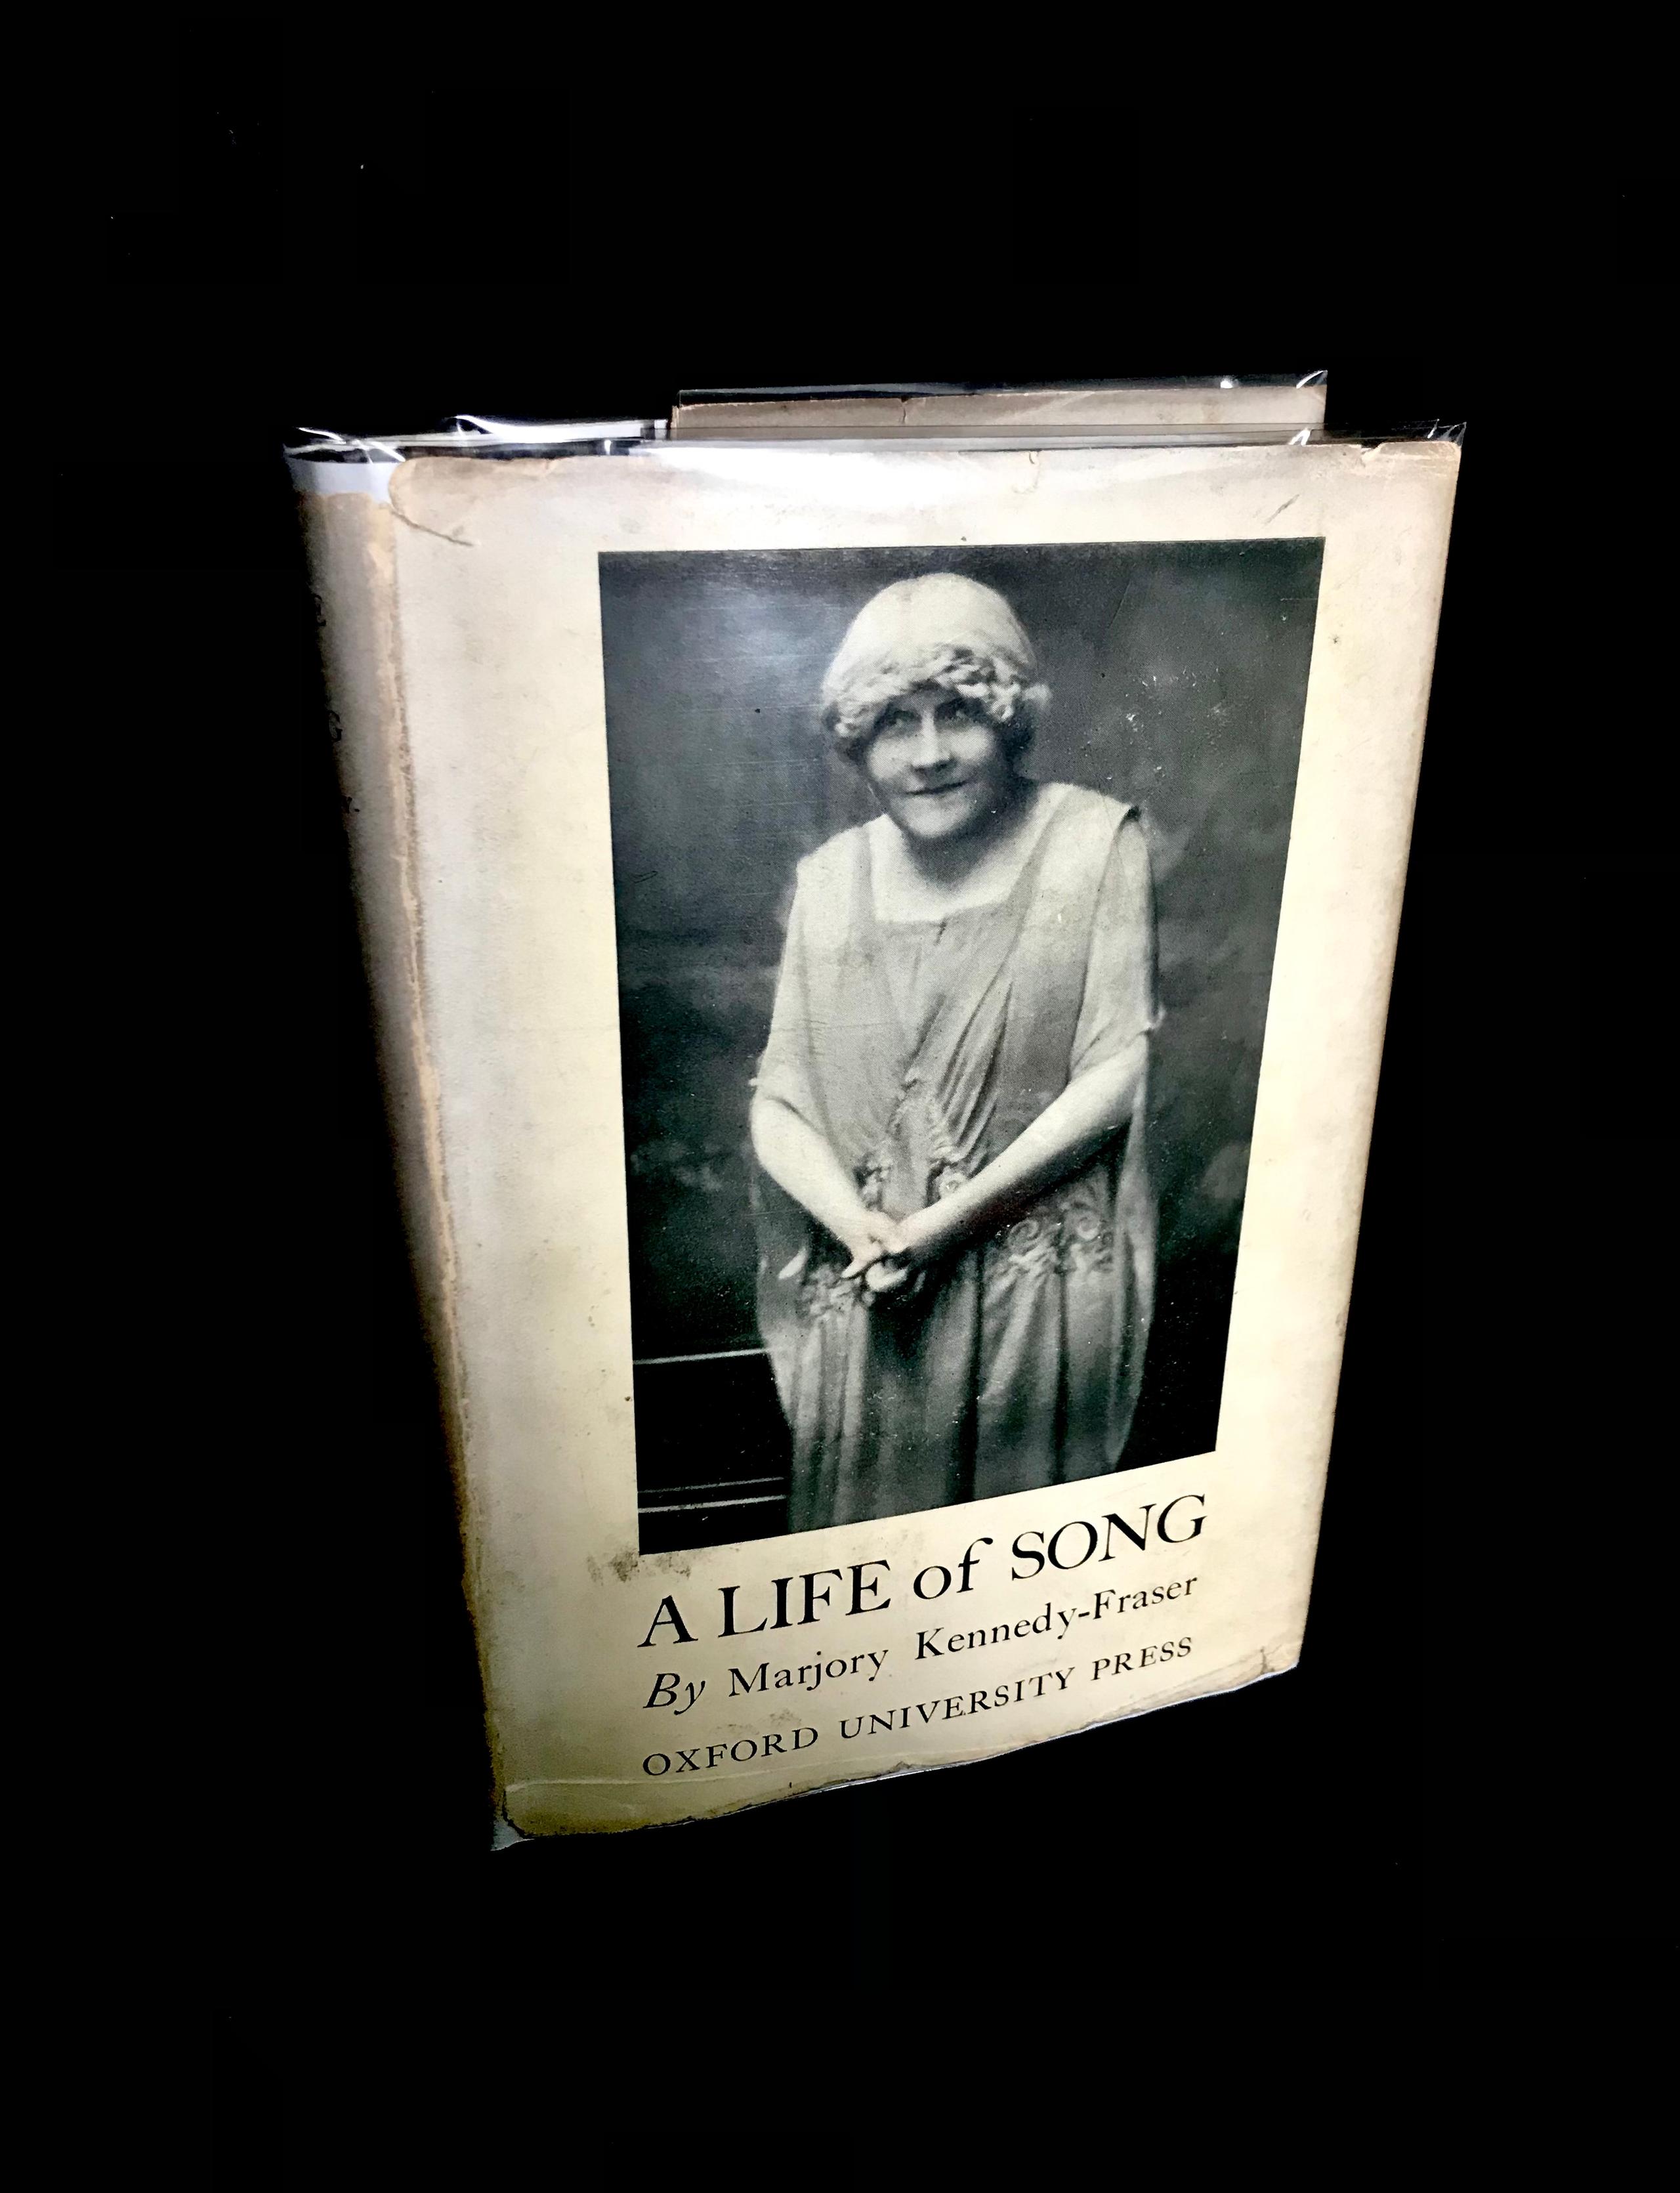 A Life of Song by Marjory Kennedy- Fraser